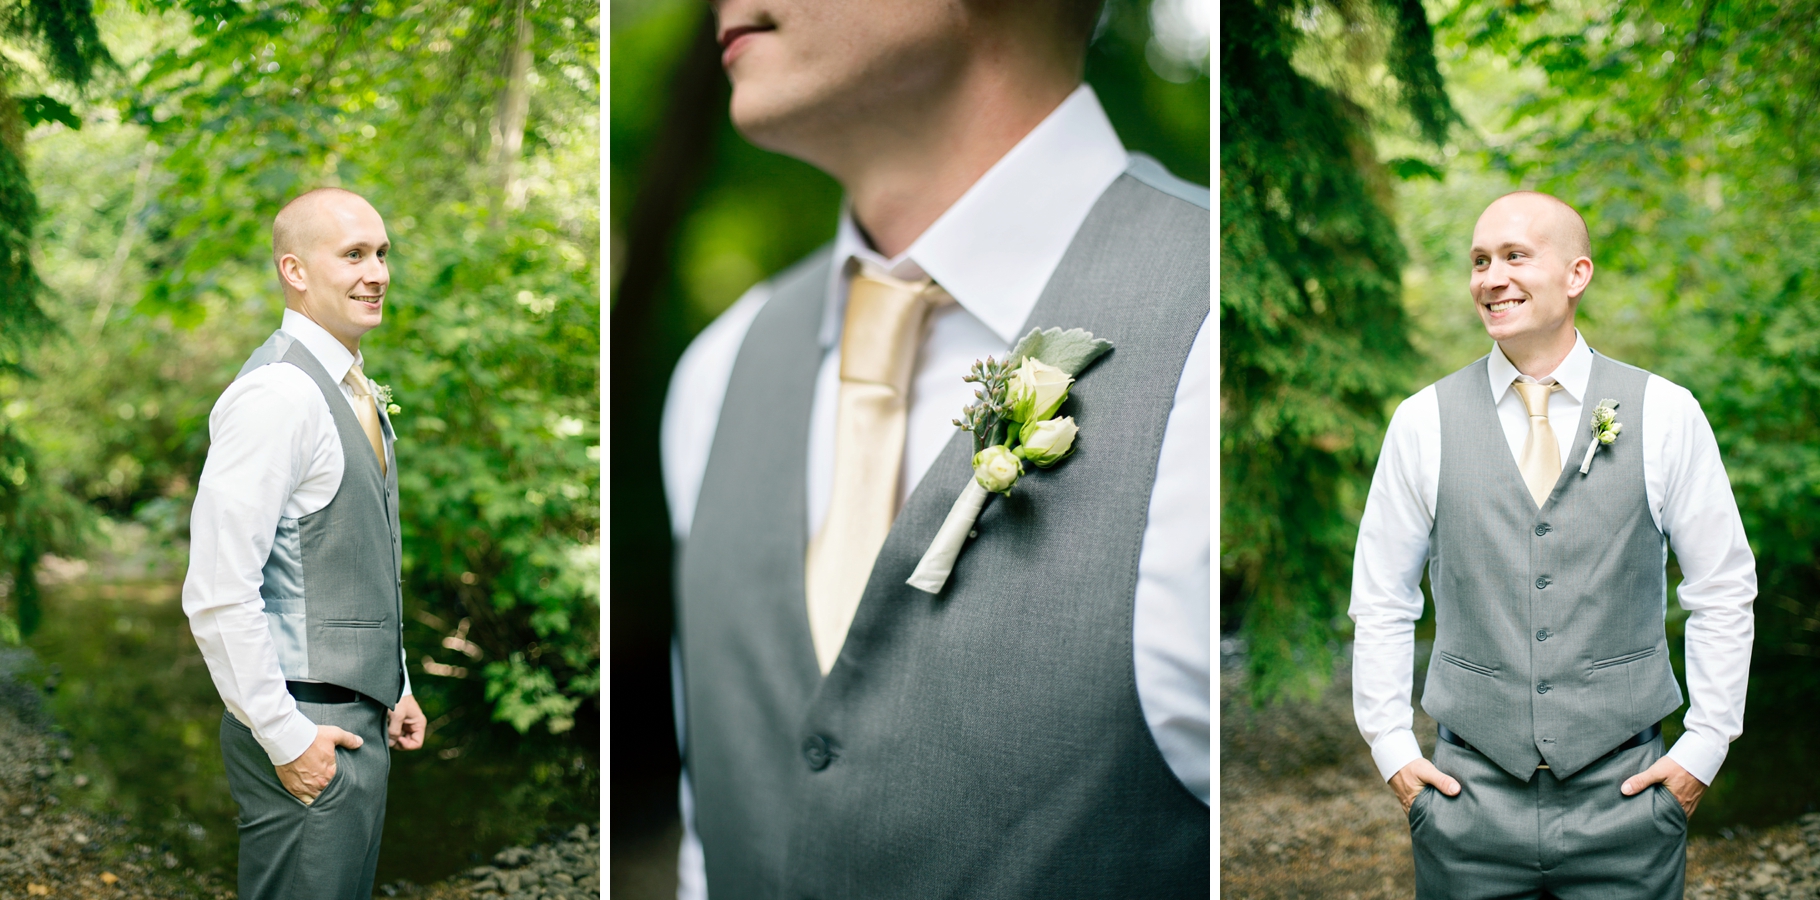 10-Groom-Portriats-Grey-Suit-Boutonniere-Creek-Woods-Forrest-Normandy-Cove-Beach-Wedding-Photographer-Bride-Groom-Seattle-Wedding-Photography-Northwest